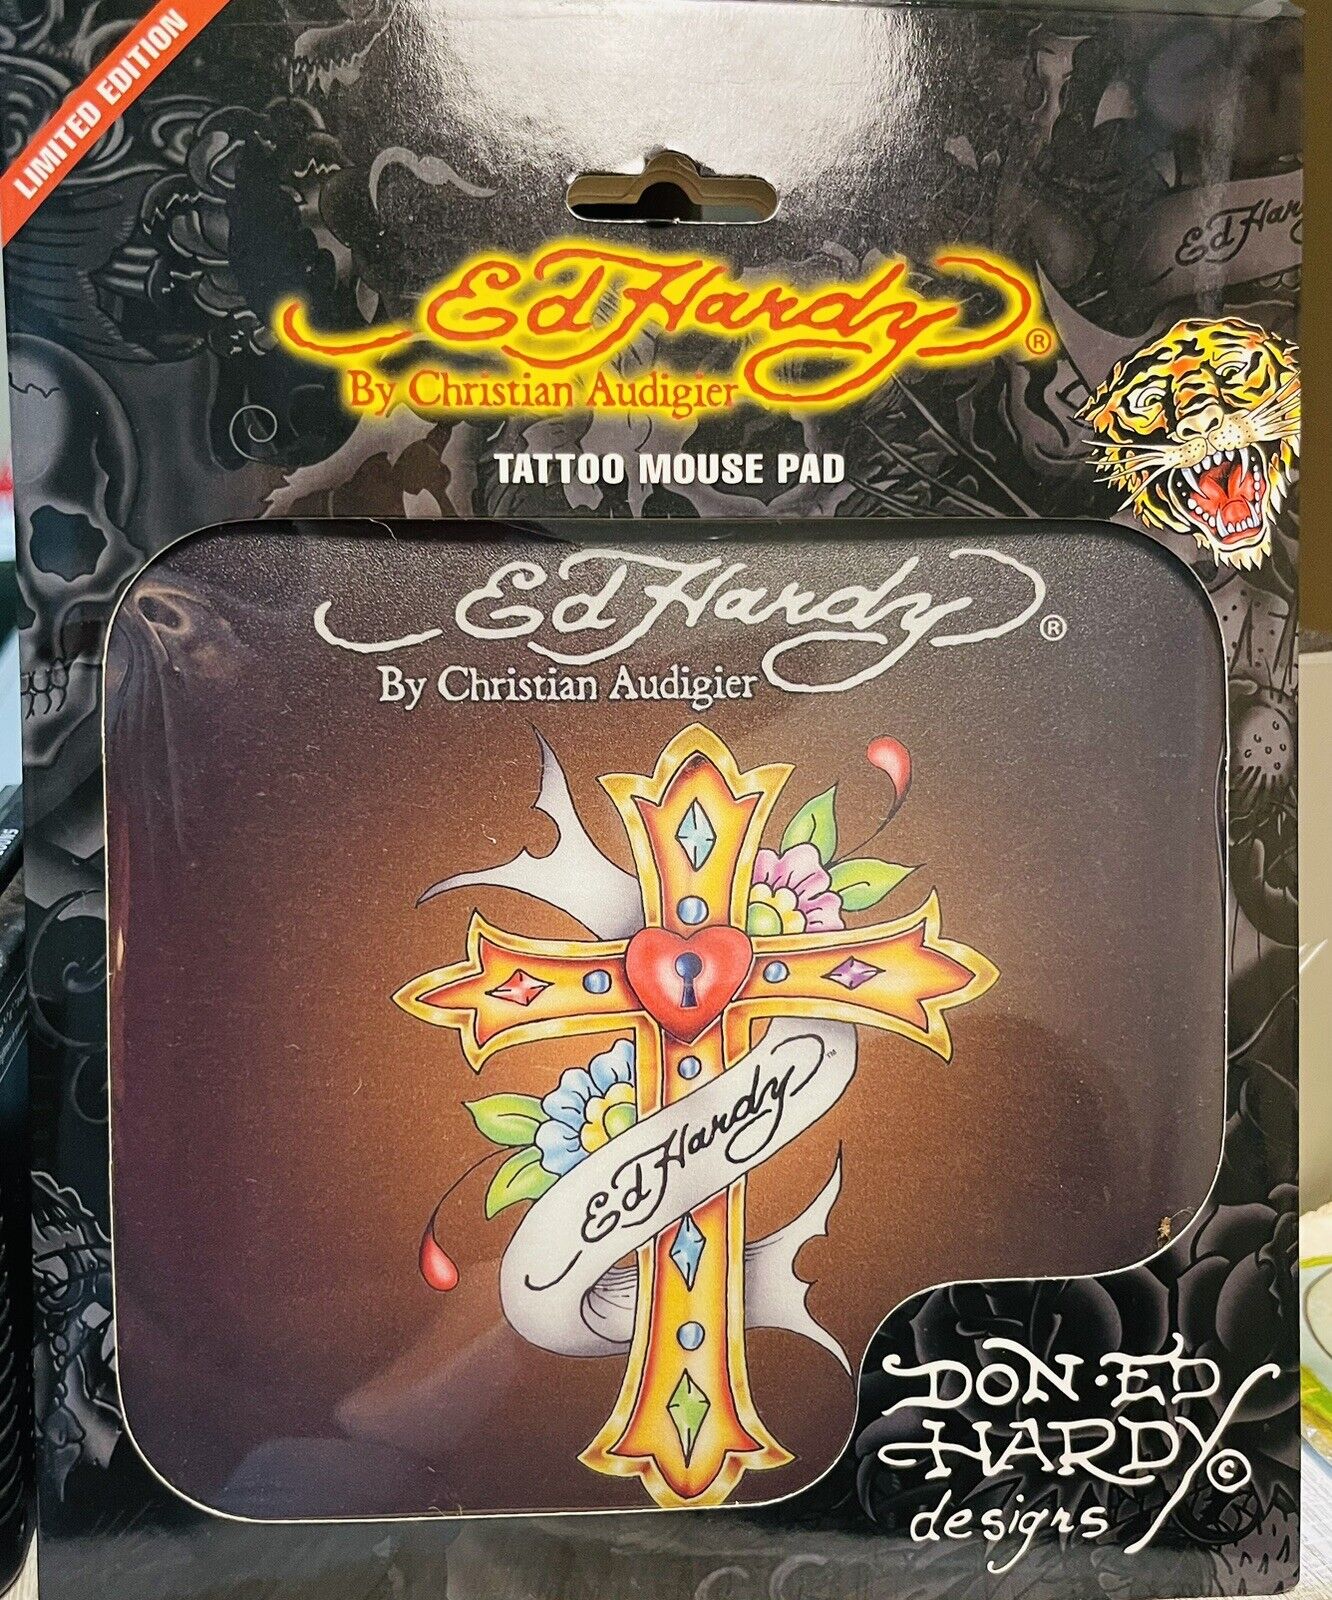 Ed Hardy Mouse Pad Love Cross Tattoo Limited Edition Open Box Rare Find